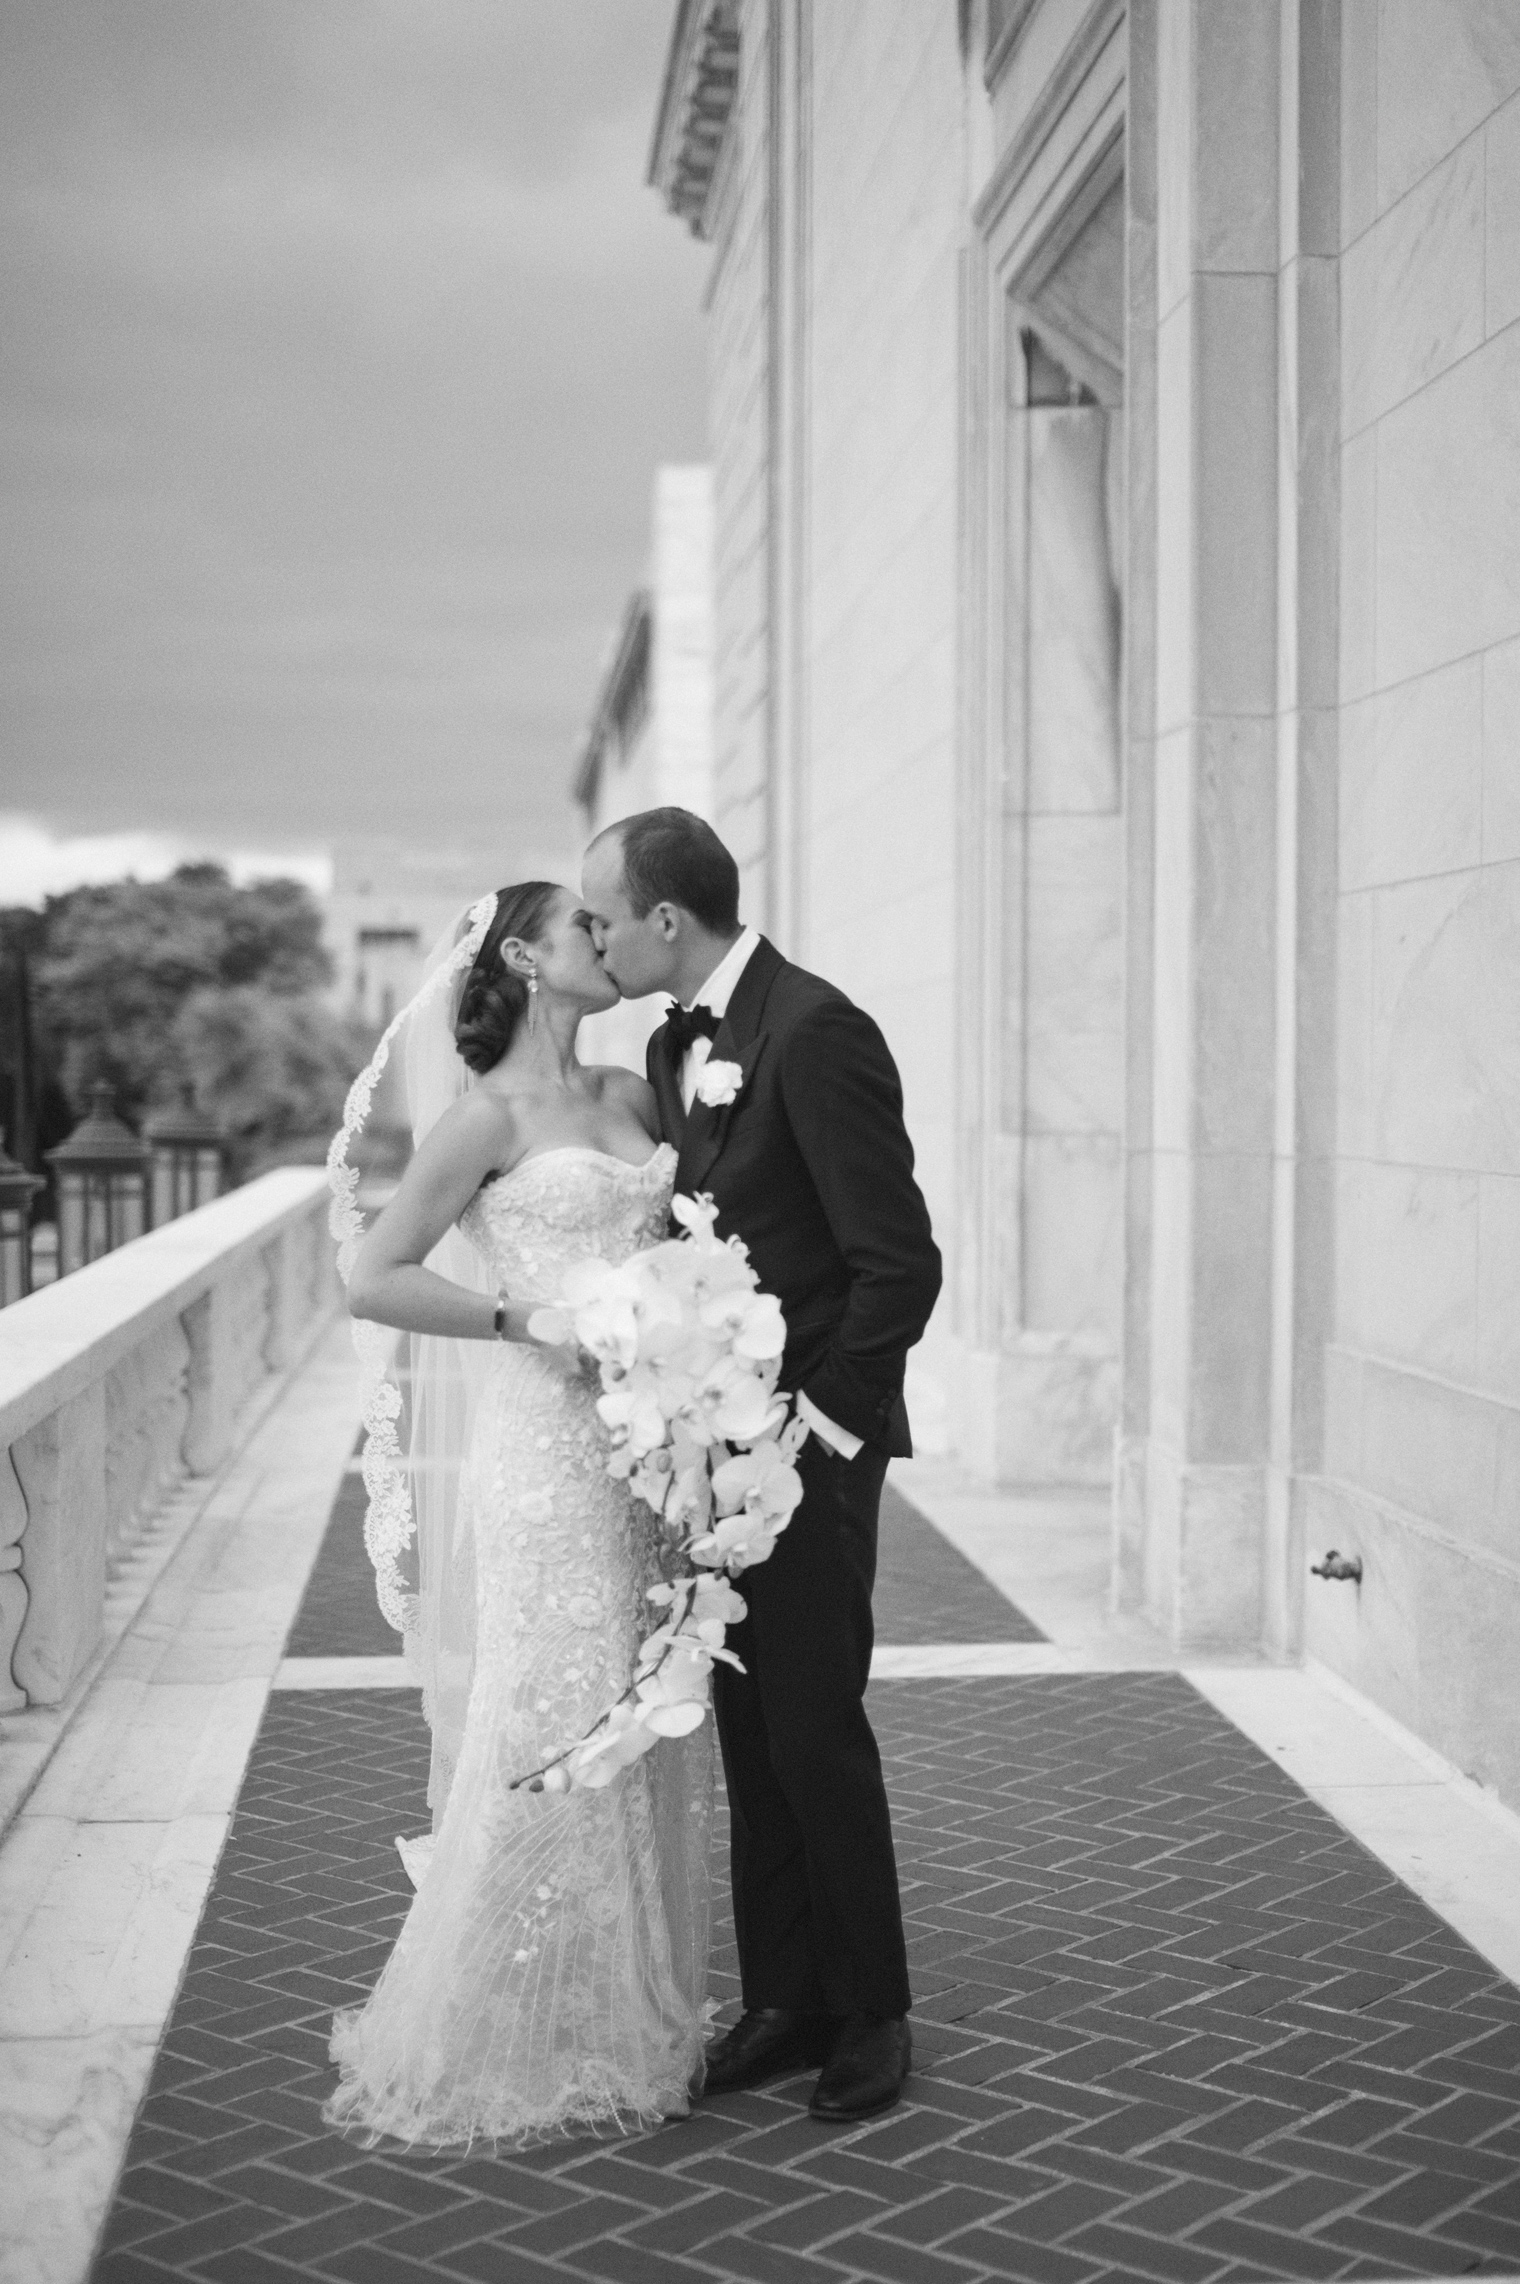 Old school glamour bride and groom portraits at the Detroit Institute of Arts by Wedding Photographer Heather Jowett.